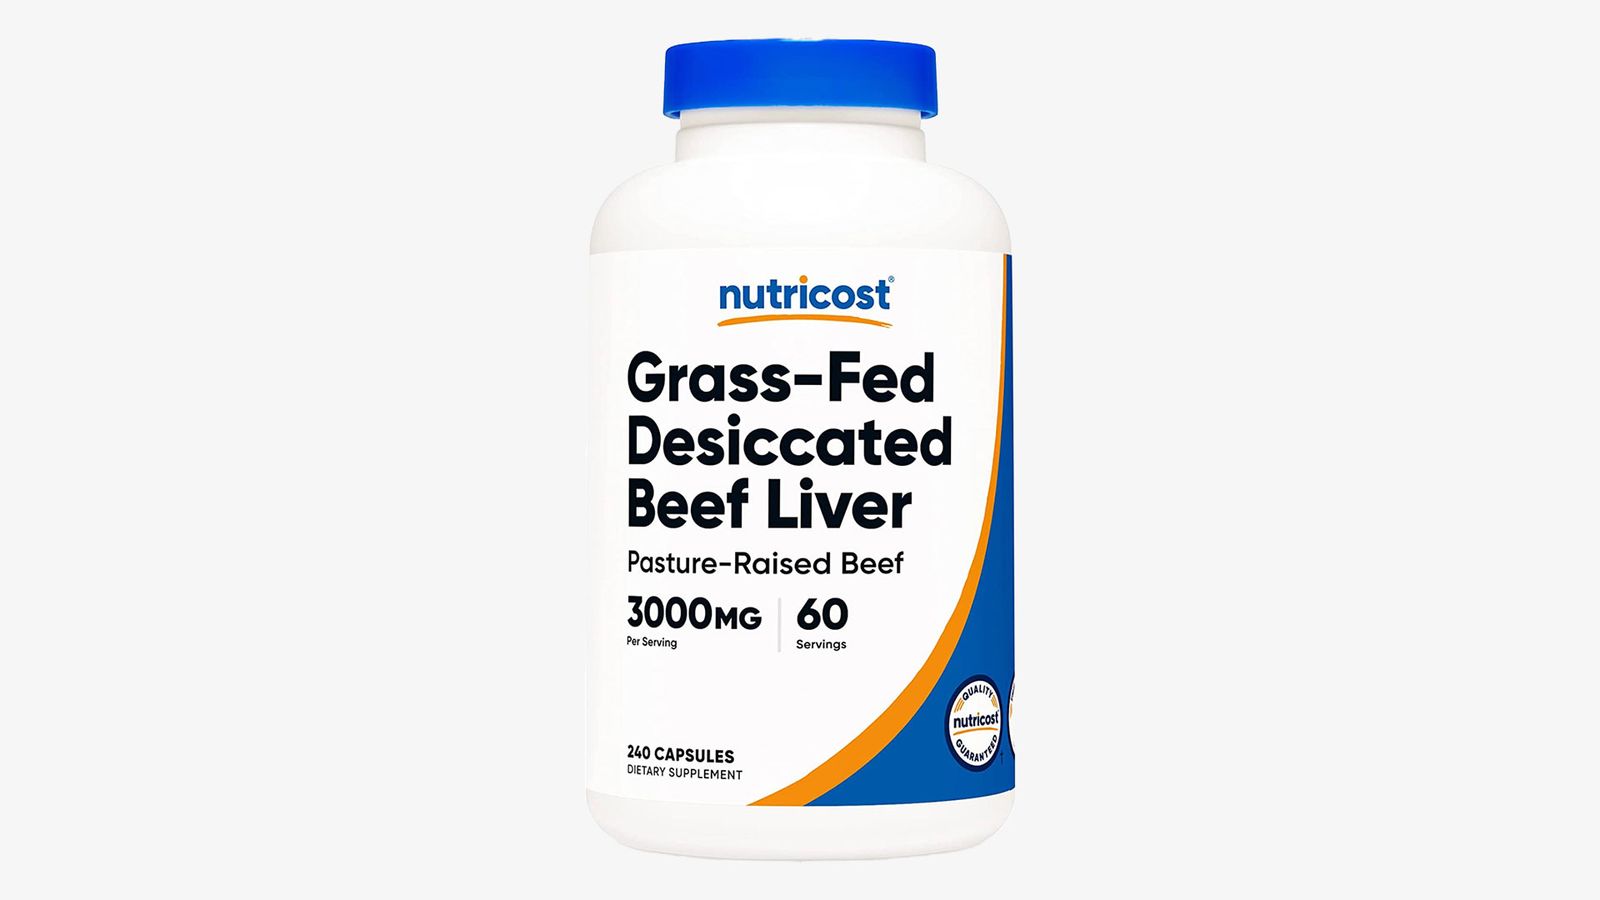 Nutricost Grass Fed Desiccated Beef Liver Capsules product image of a white container with orange and blue branding.